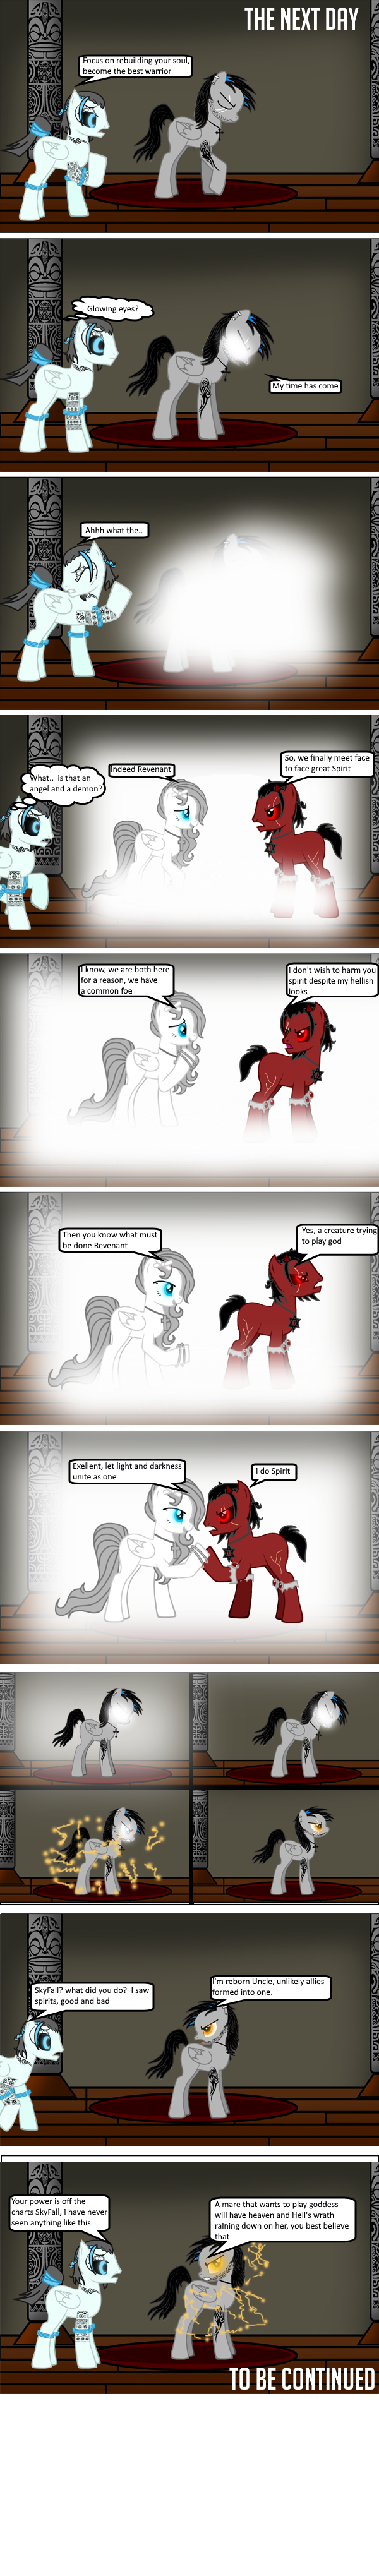 Page 3 - Unlikely Allies